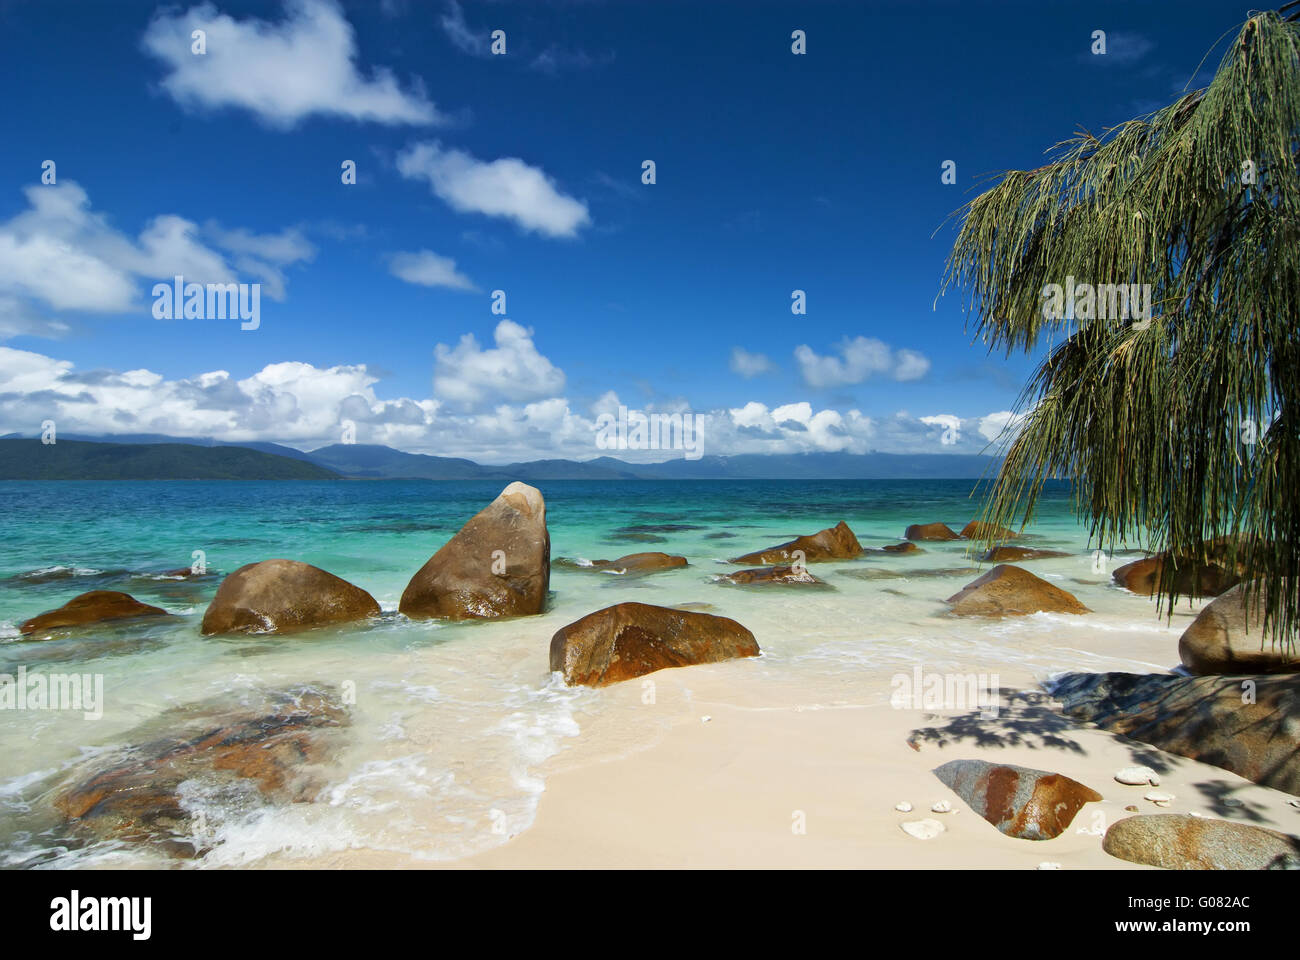 Tropical beach with rocks, tree and clear water Stock Photo